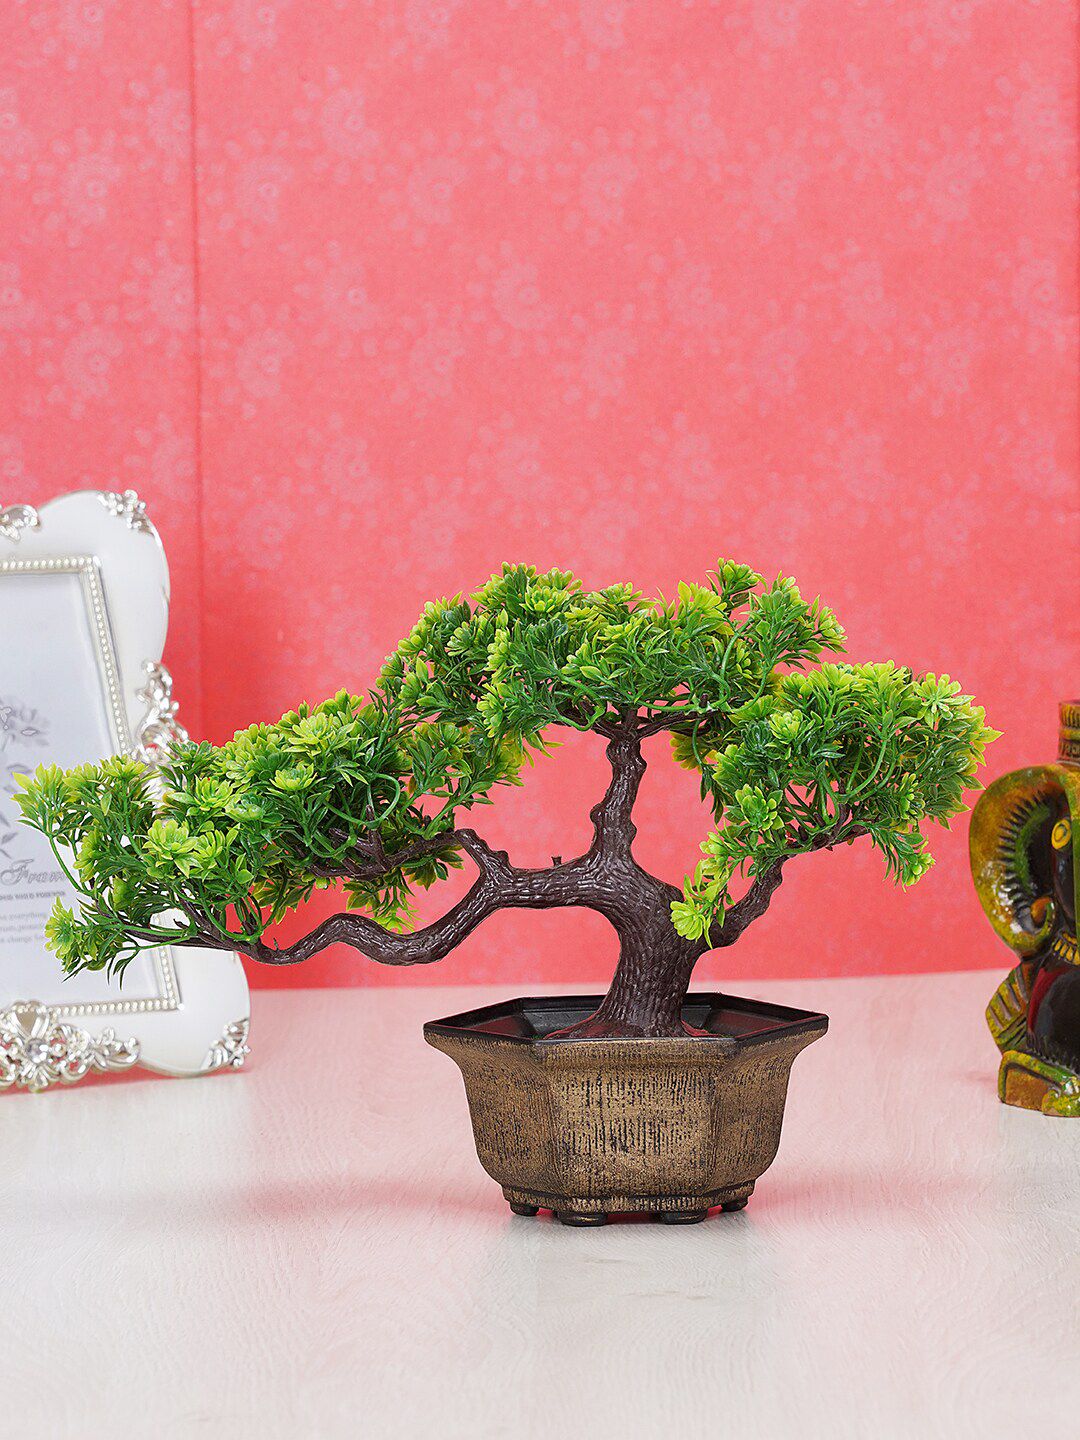 Dekorly Green & Gold-Toned Artificial Wild Decorative Bonsai Plant With Pot Price in India